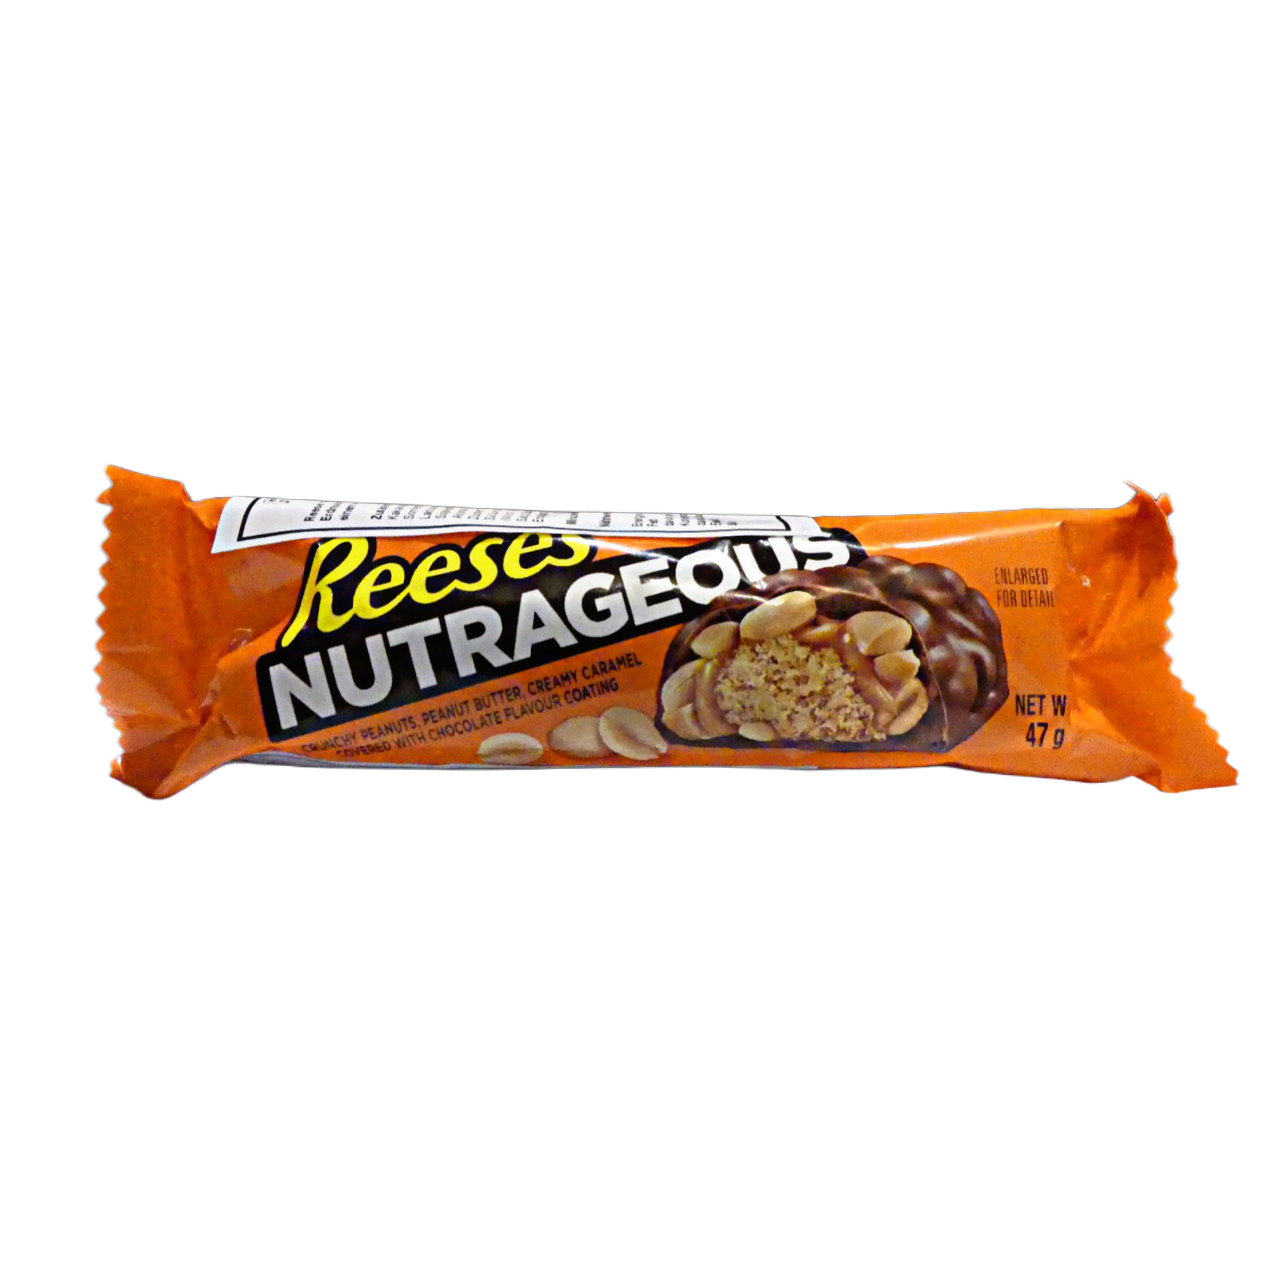 Reese's Nutrageous USA 47g